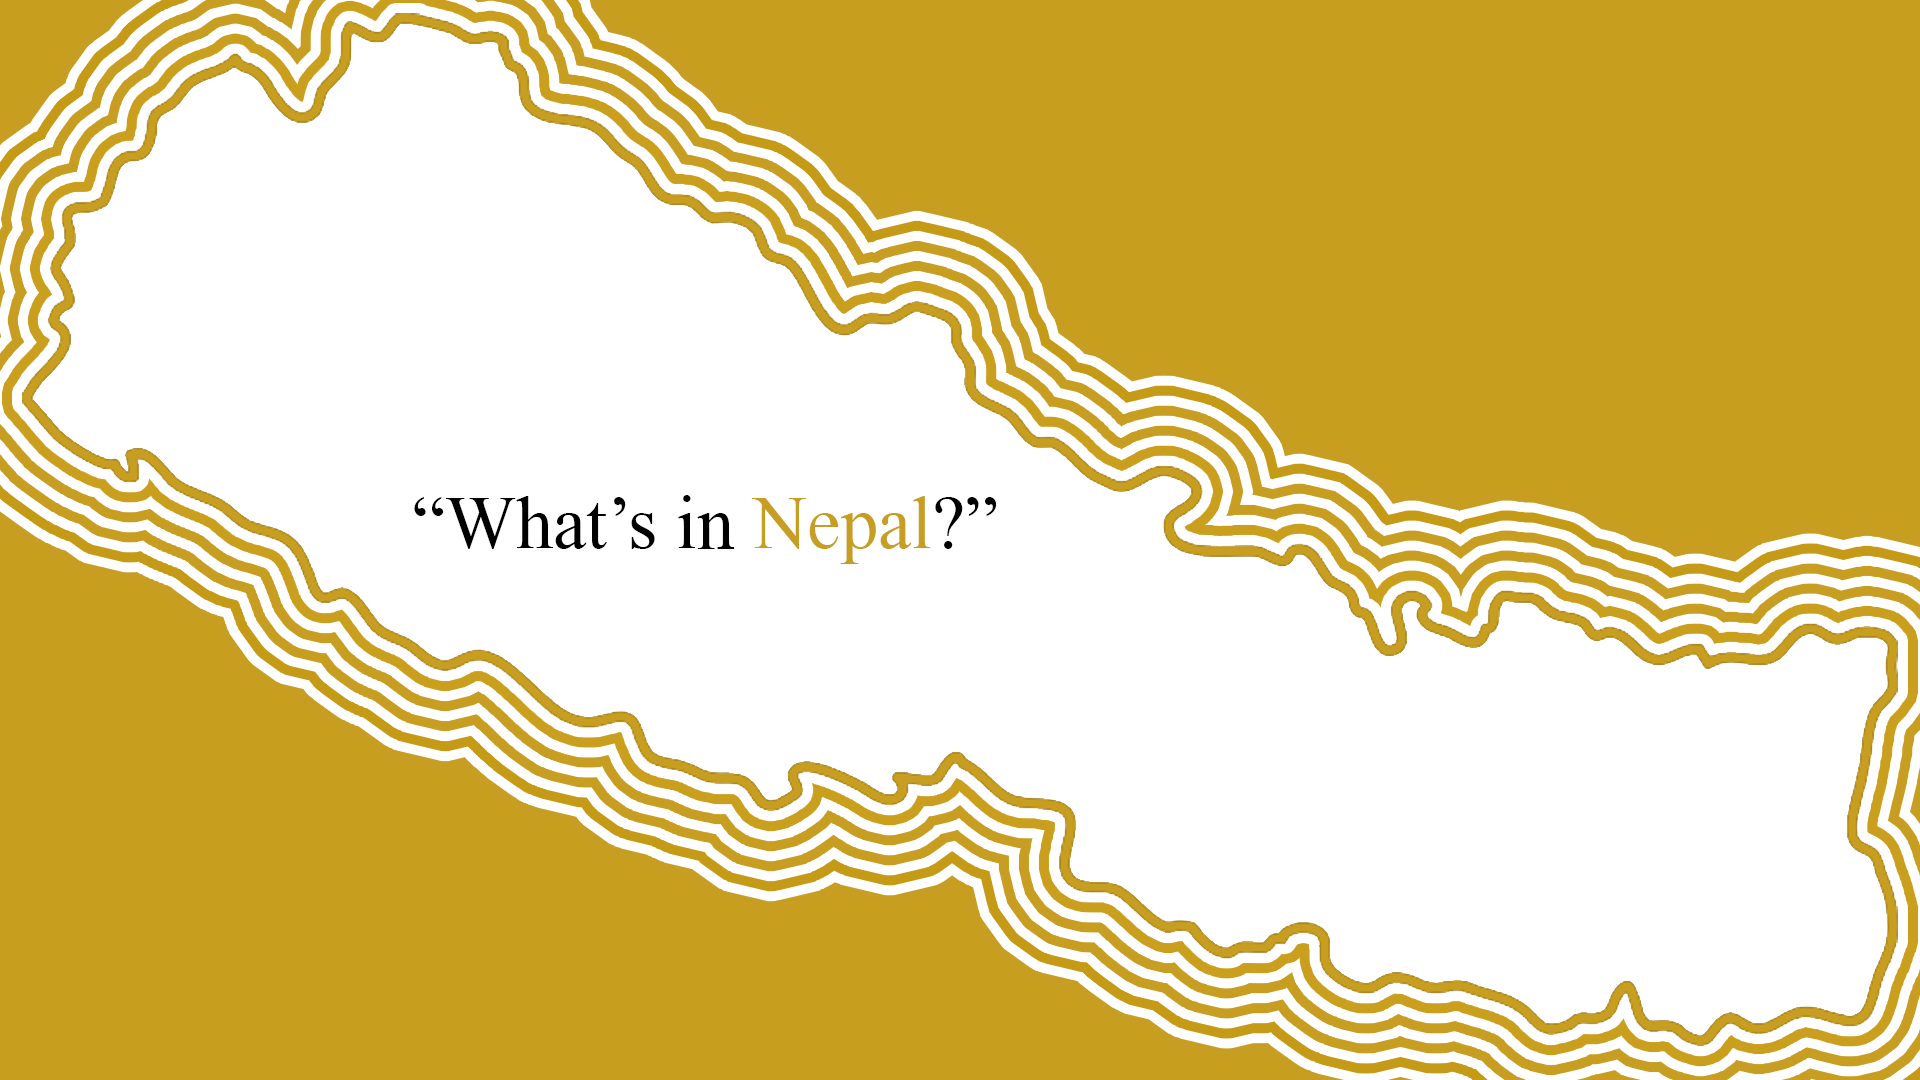 What's in Nepal?